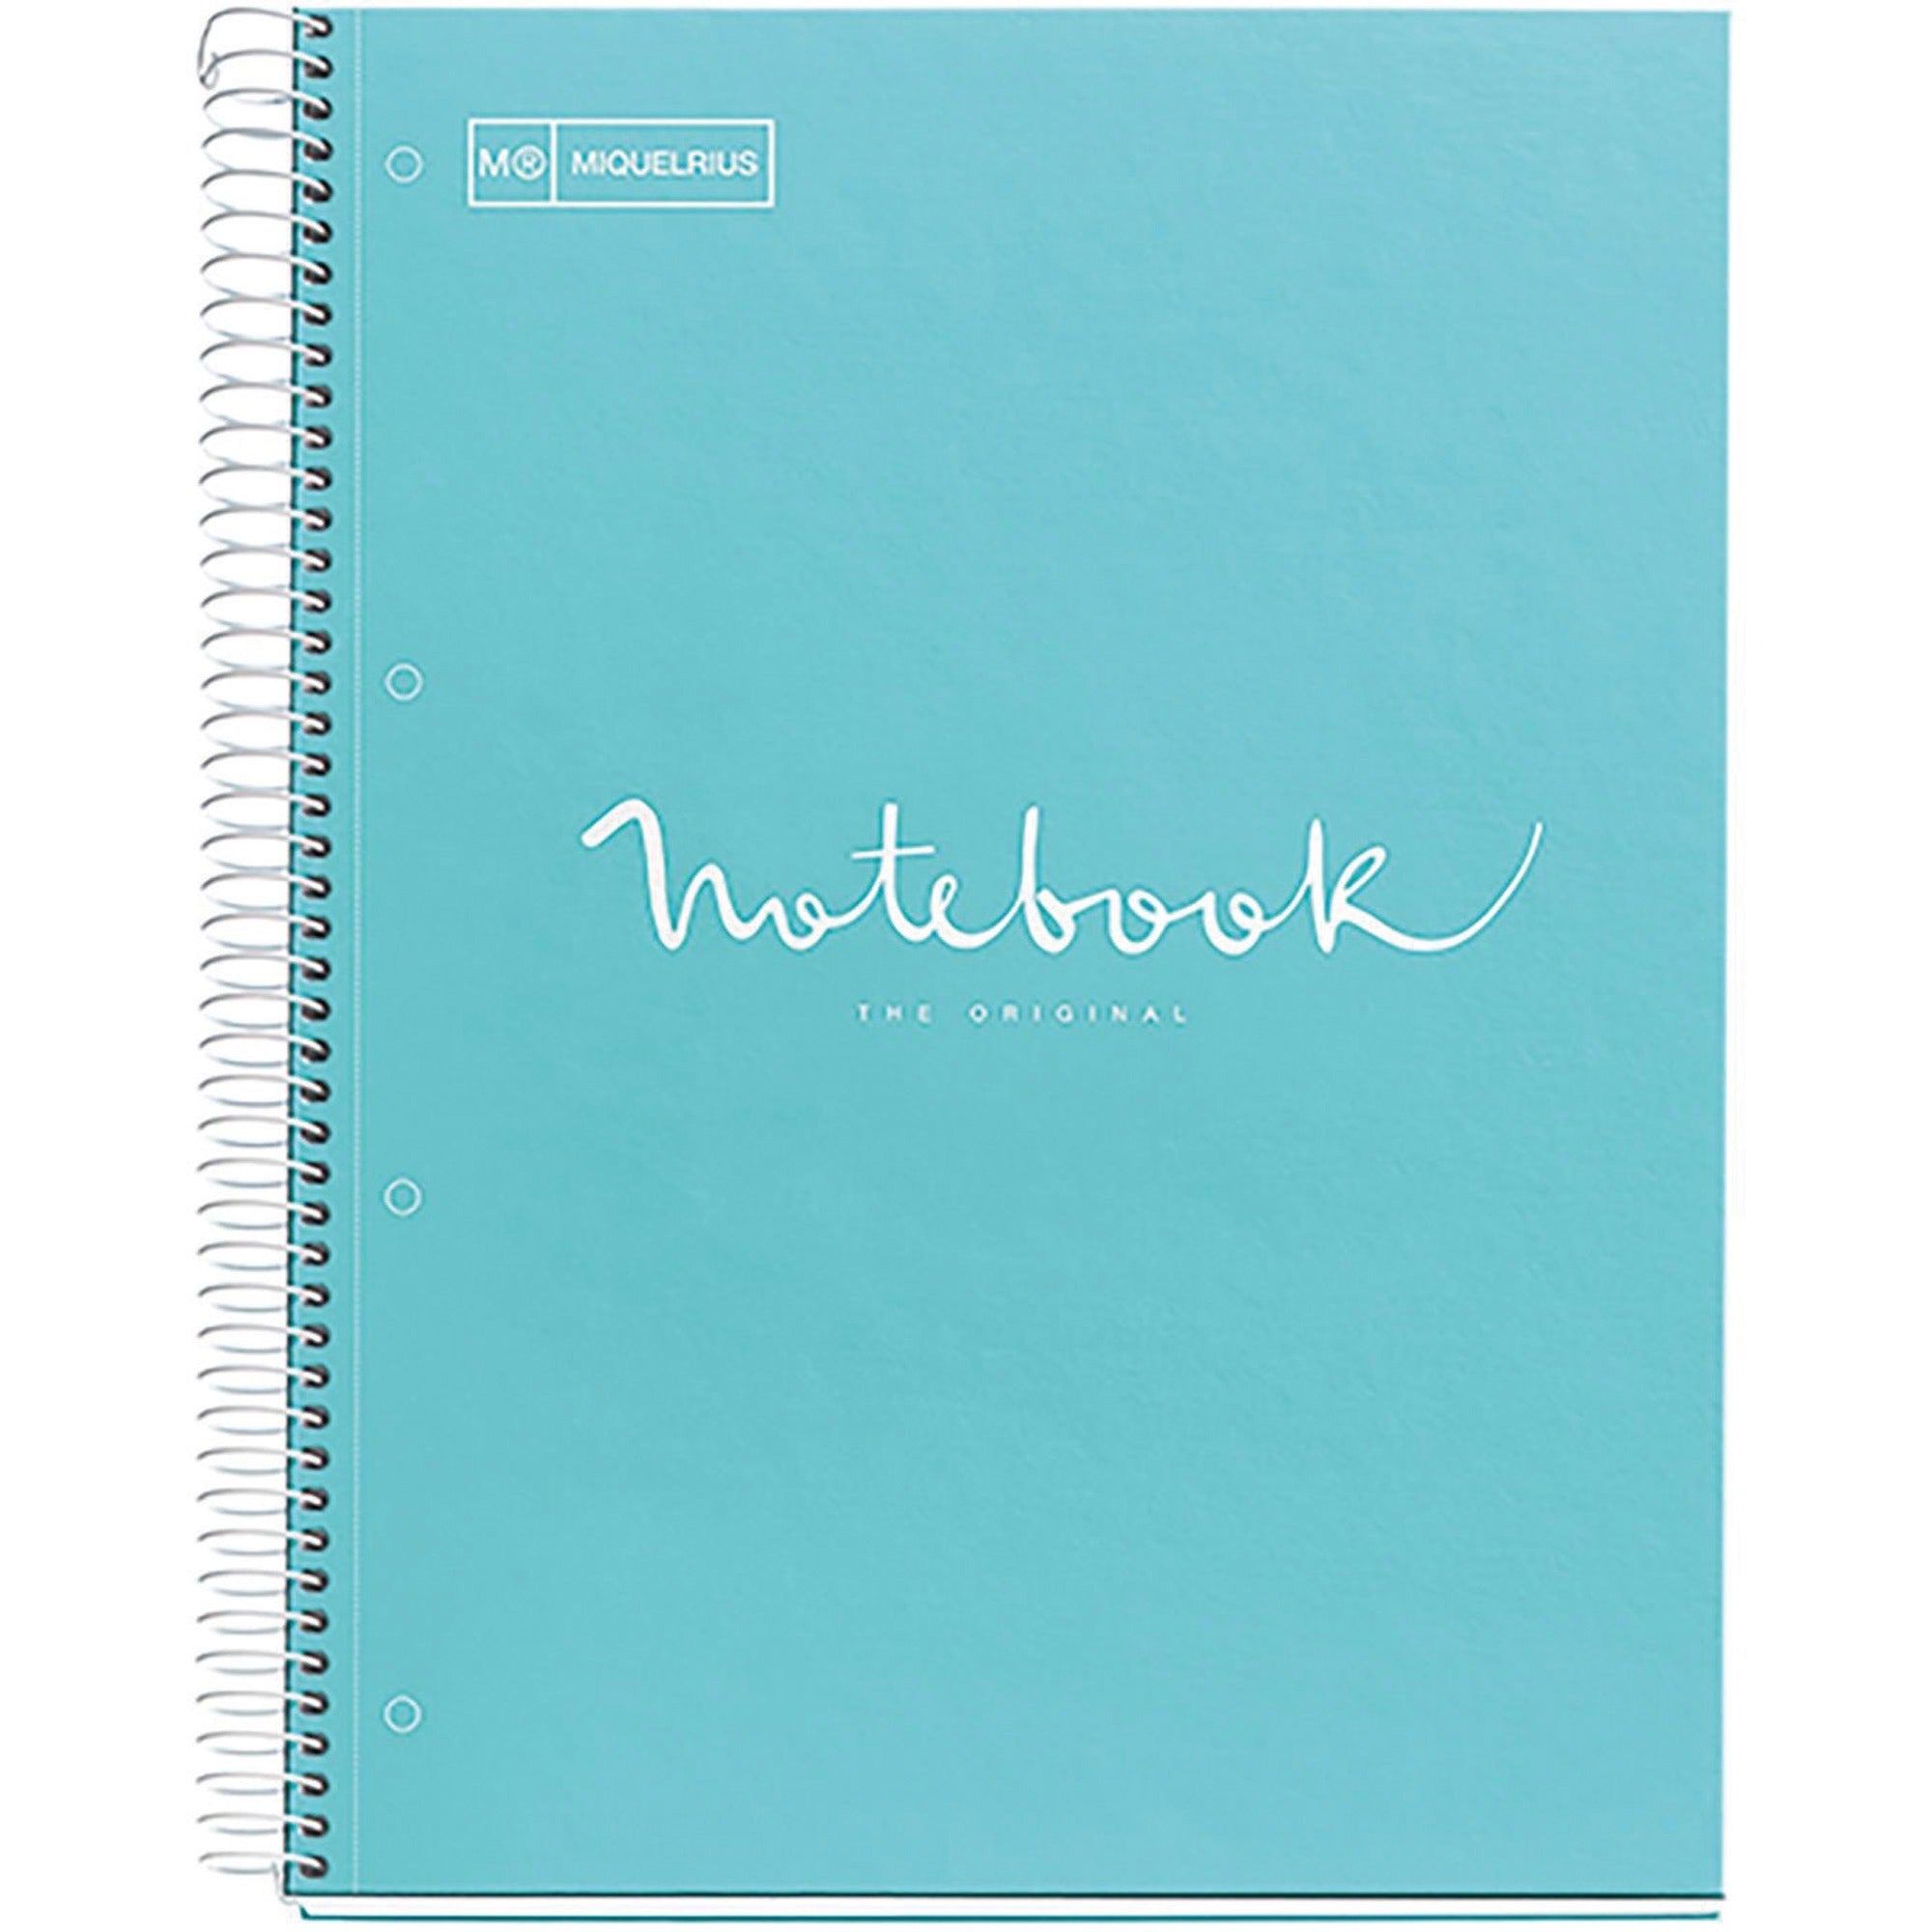 roaring-spring-fashion-tint-1-subject-notebook-1-subjects-wire-bound-3-holes-24-lb-basis-weight-030-x-85-x-11-cardboard-plastic-cover-perforated-hole-punched-sturdy-bleed-free-printed-durable-smooth-1-each_roa49273 - 1